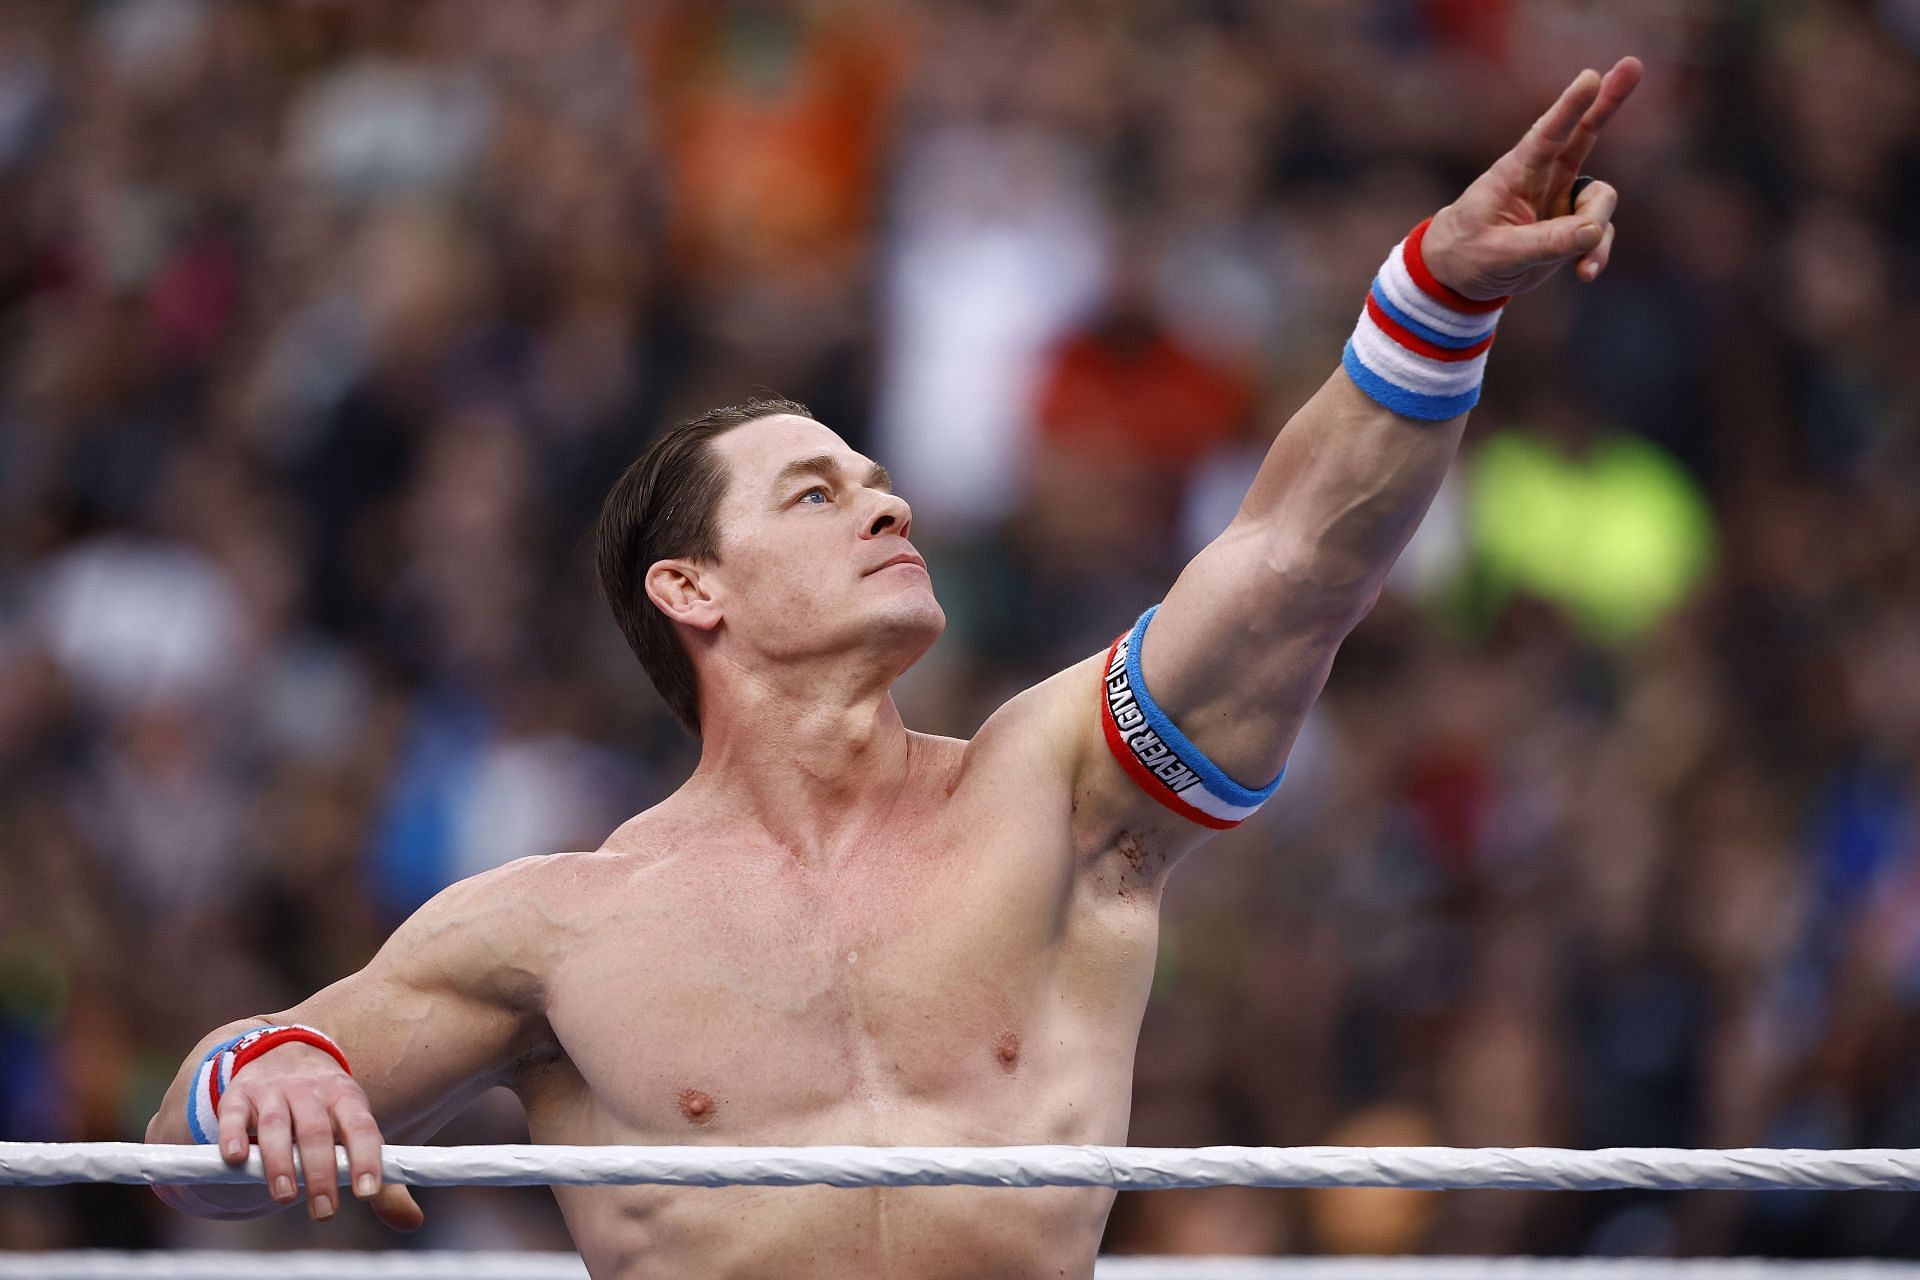 Fact check: Did John Cena play in the NFL before rising to WWE